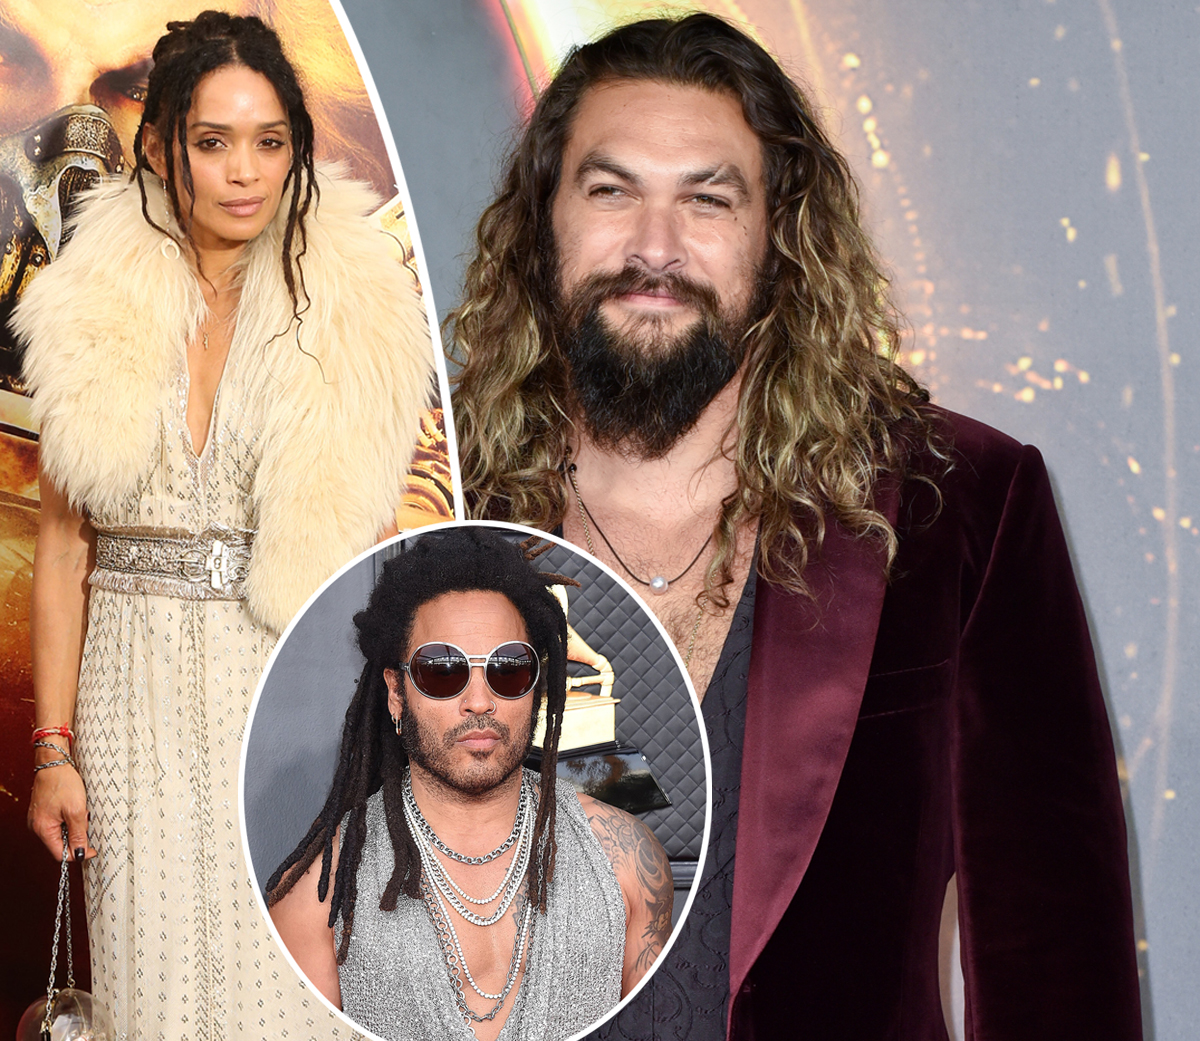 #Jason Momoa Reacts After Lenny Kravitz Posts Pic Kissing Their Ex Lisa Bonet For Her Birthday!